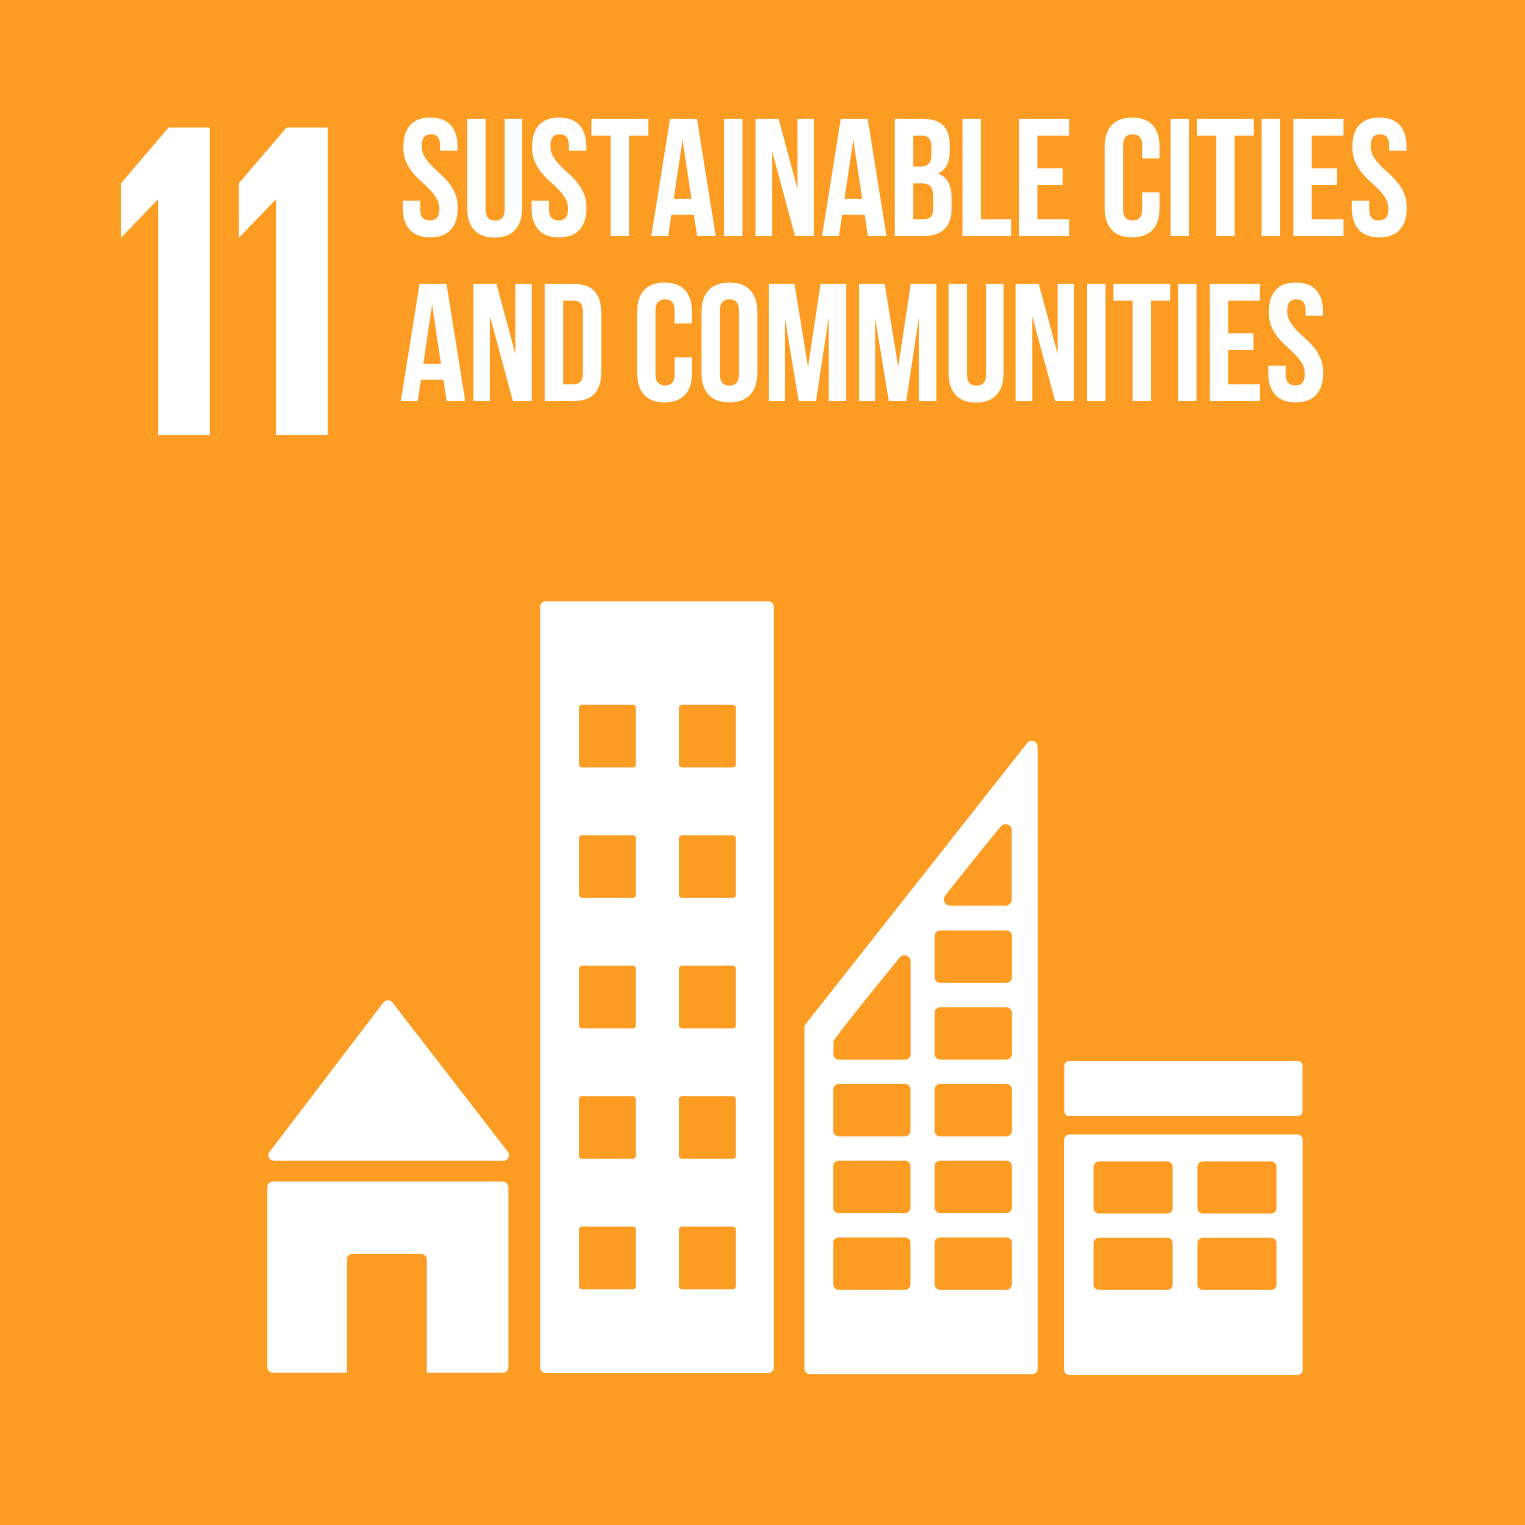 【SDG 11】Sustainable Cities and Communities